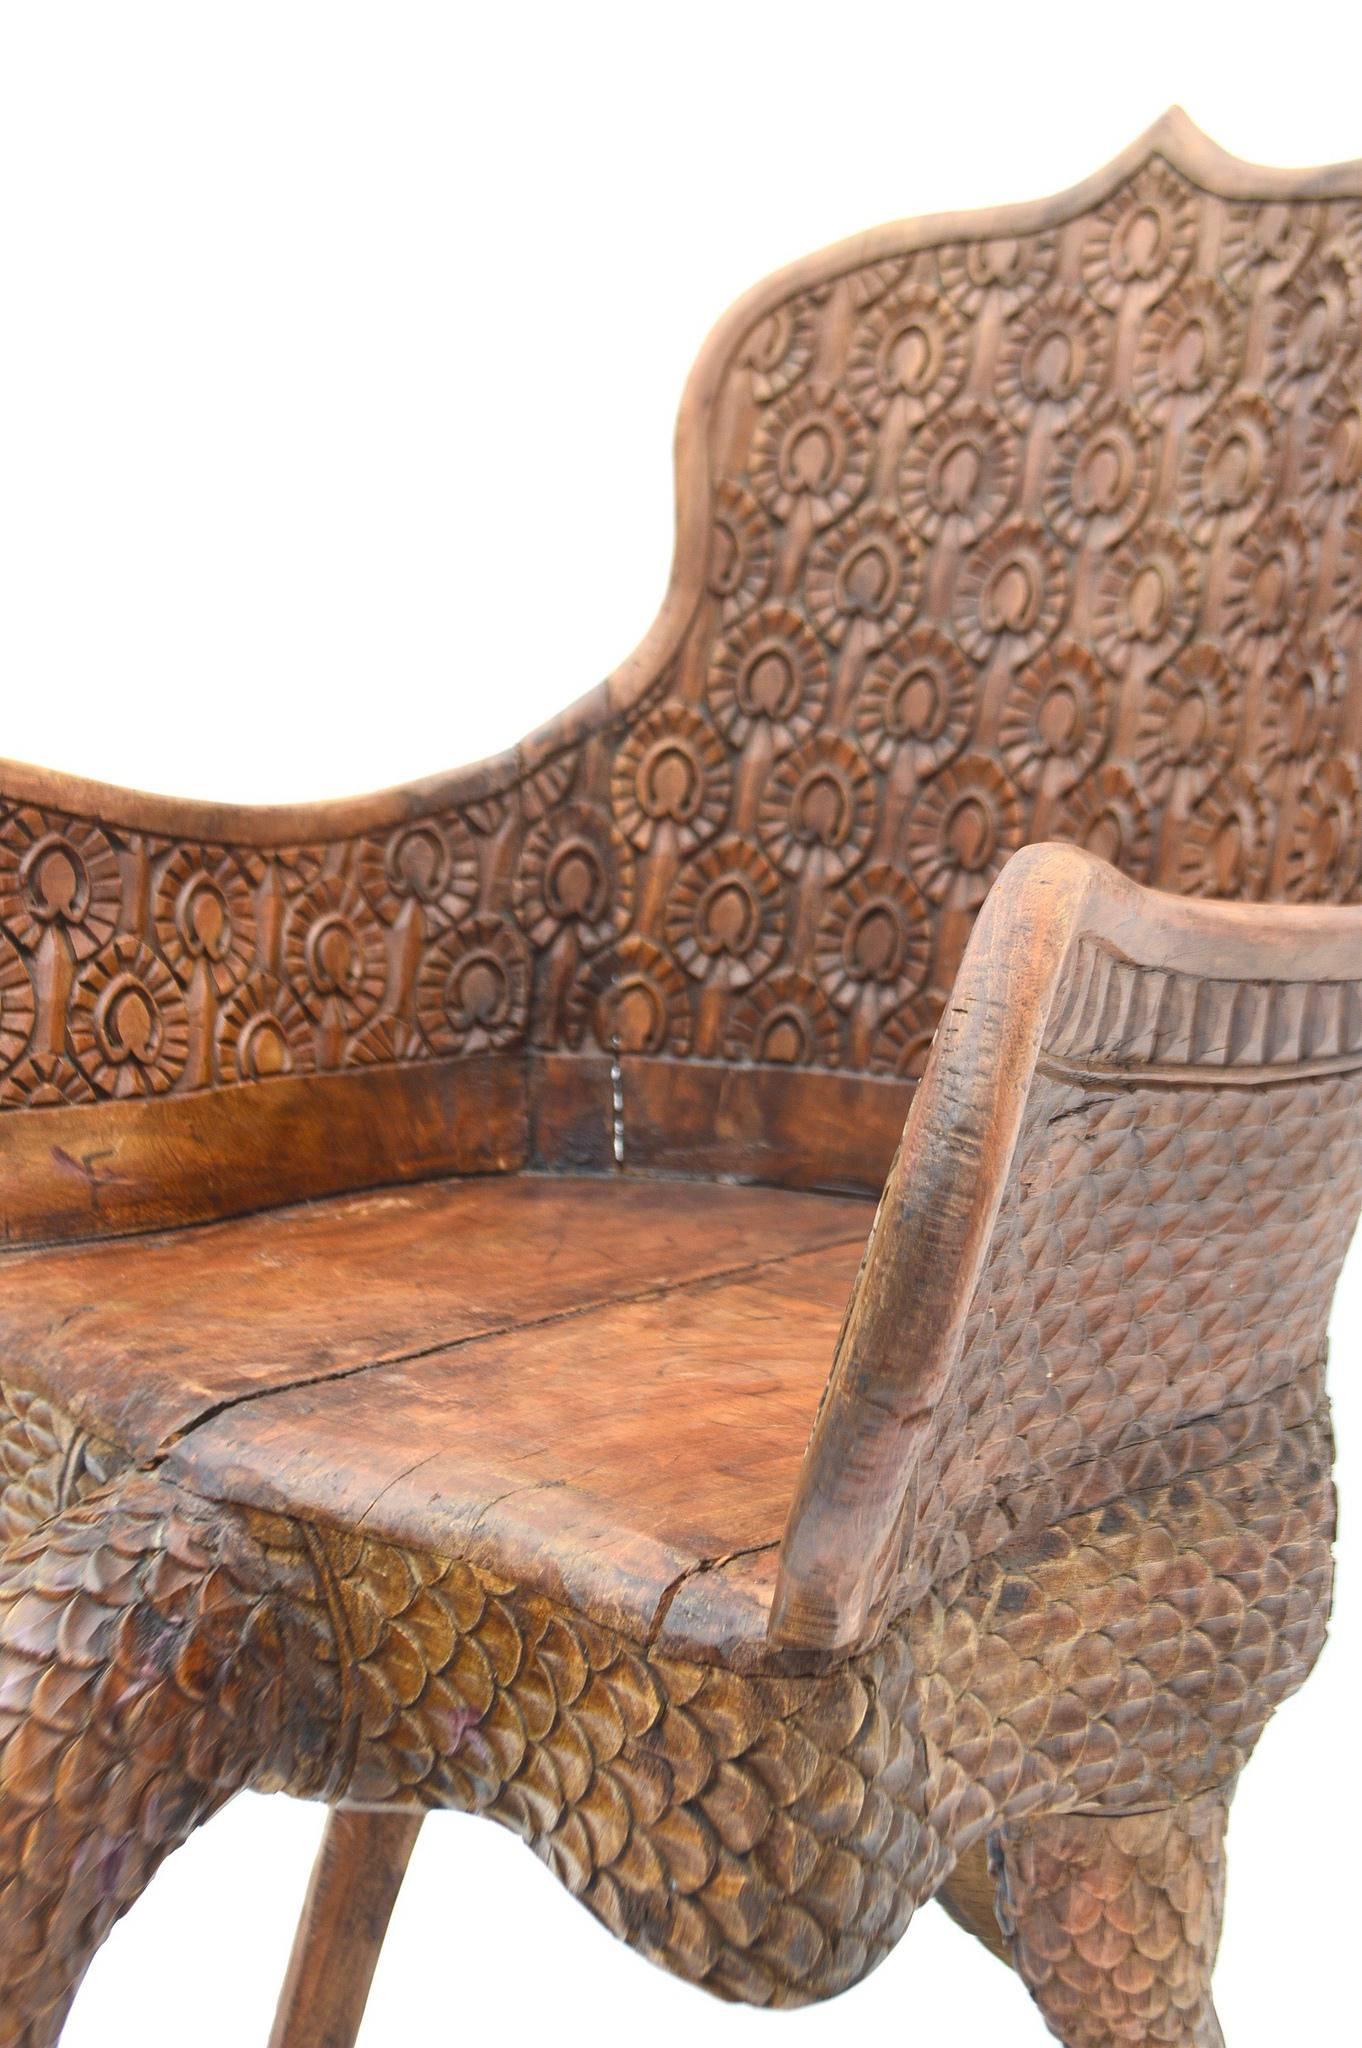 A wonderfully carved Anglo-Indian peacock chair featuring head and tail as legs. This vintage chair is heavy, sturdy and structurally sound.